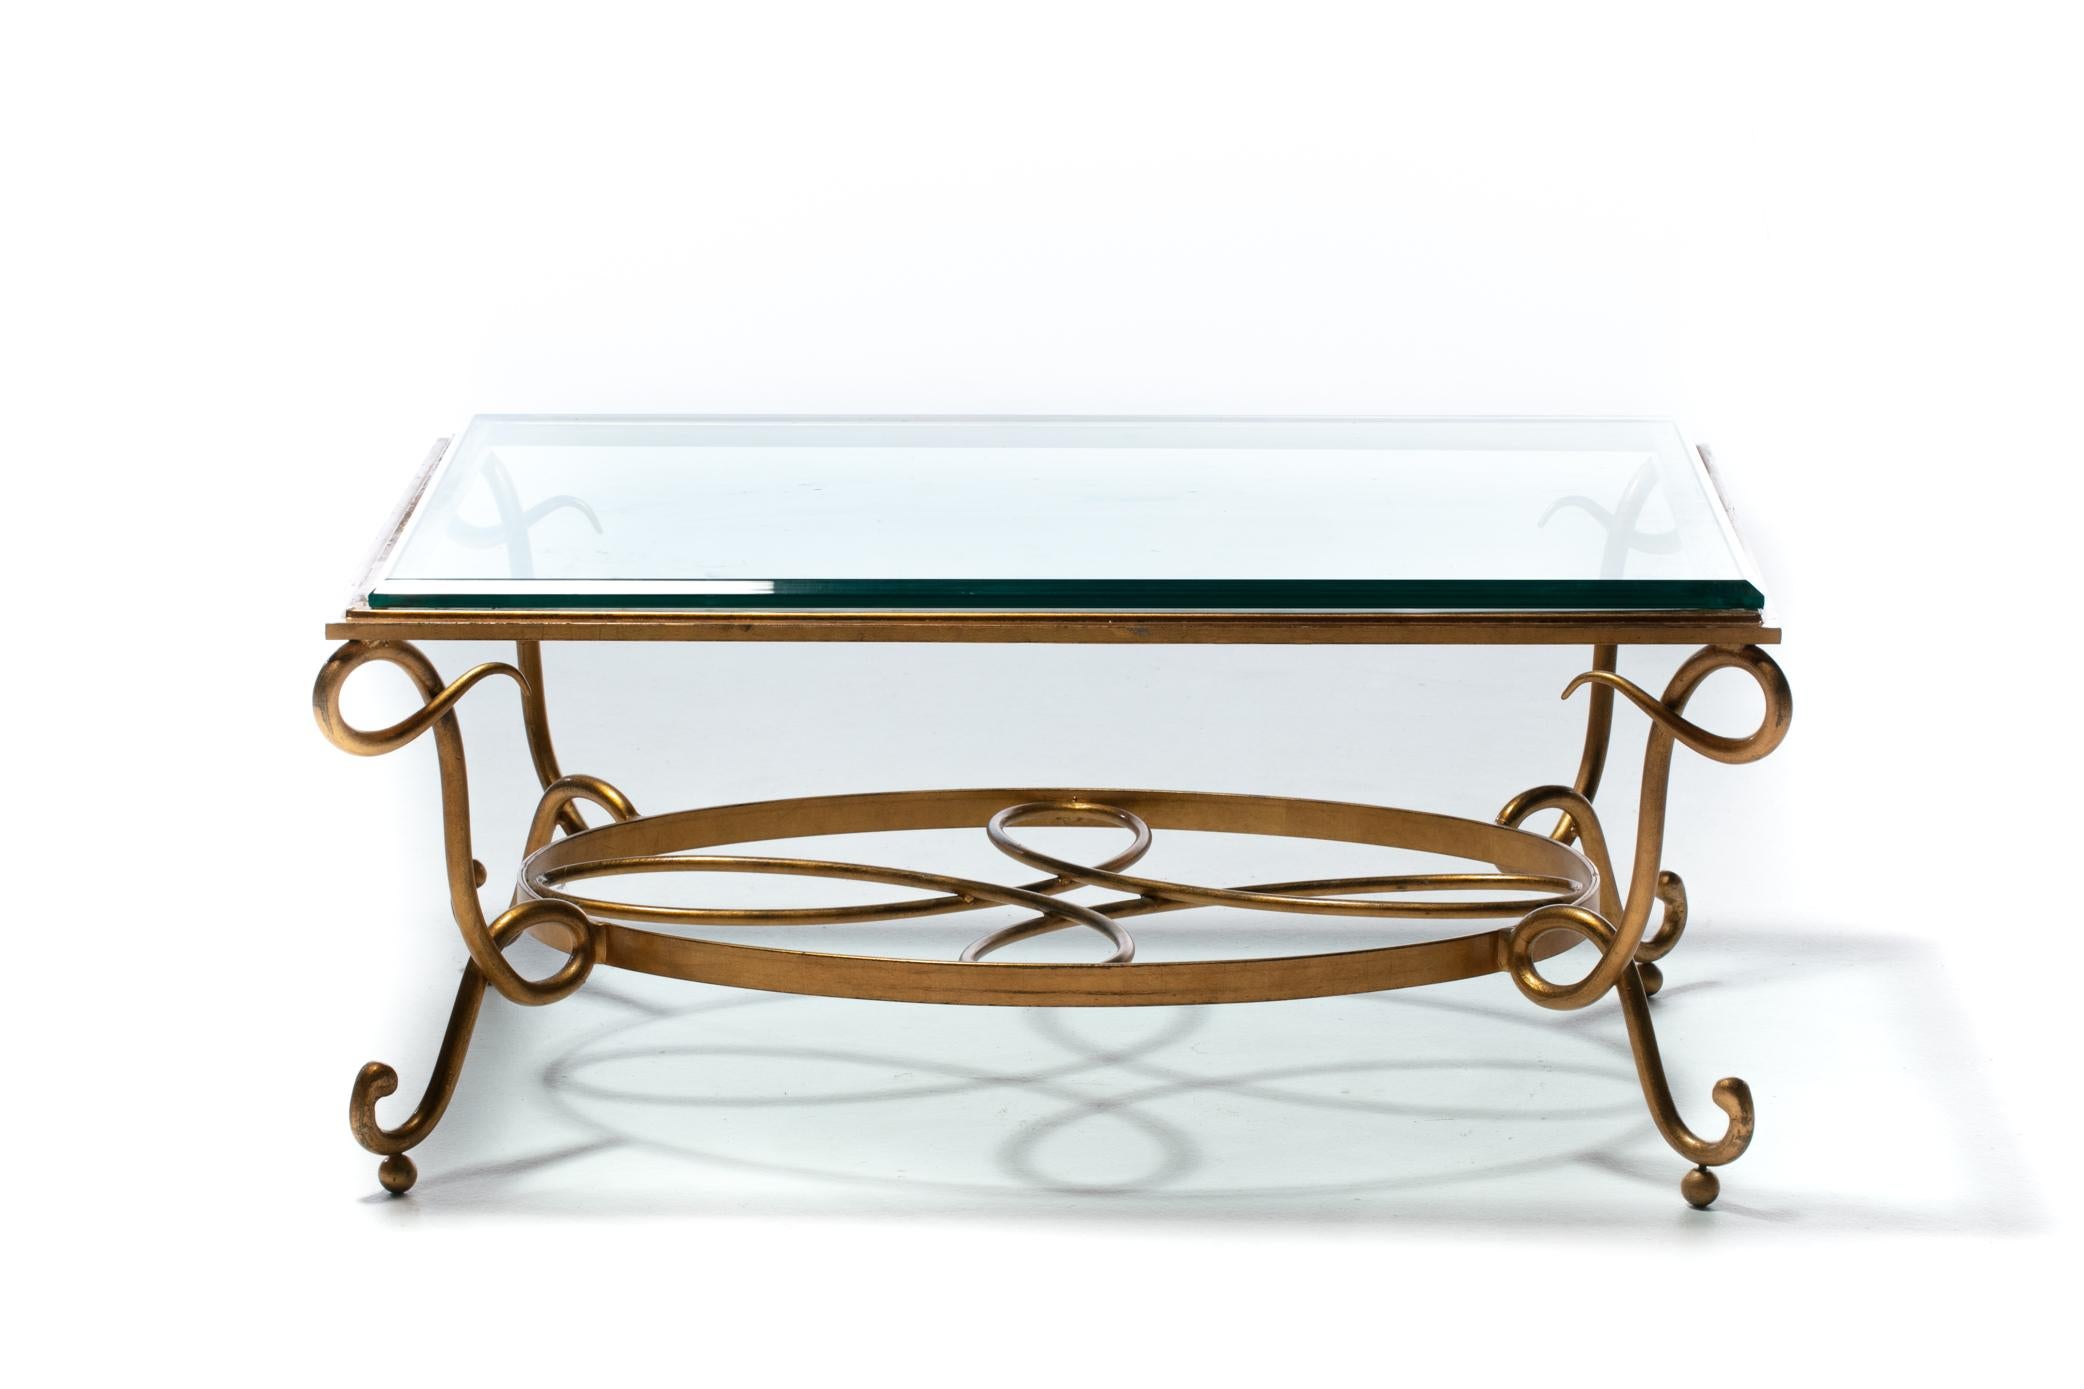 French 1940s René Prou Style Gilt Iron Coffee Table For Sale 13